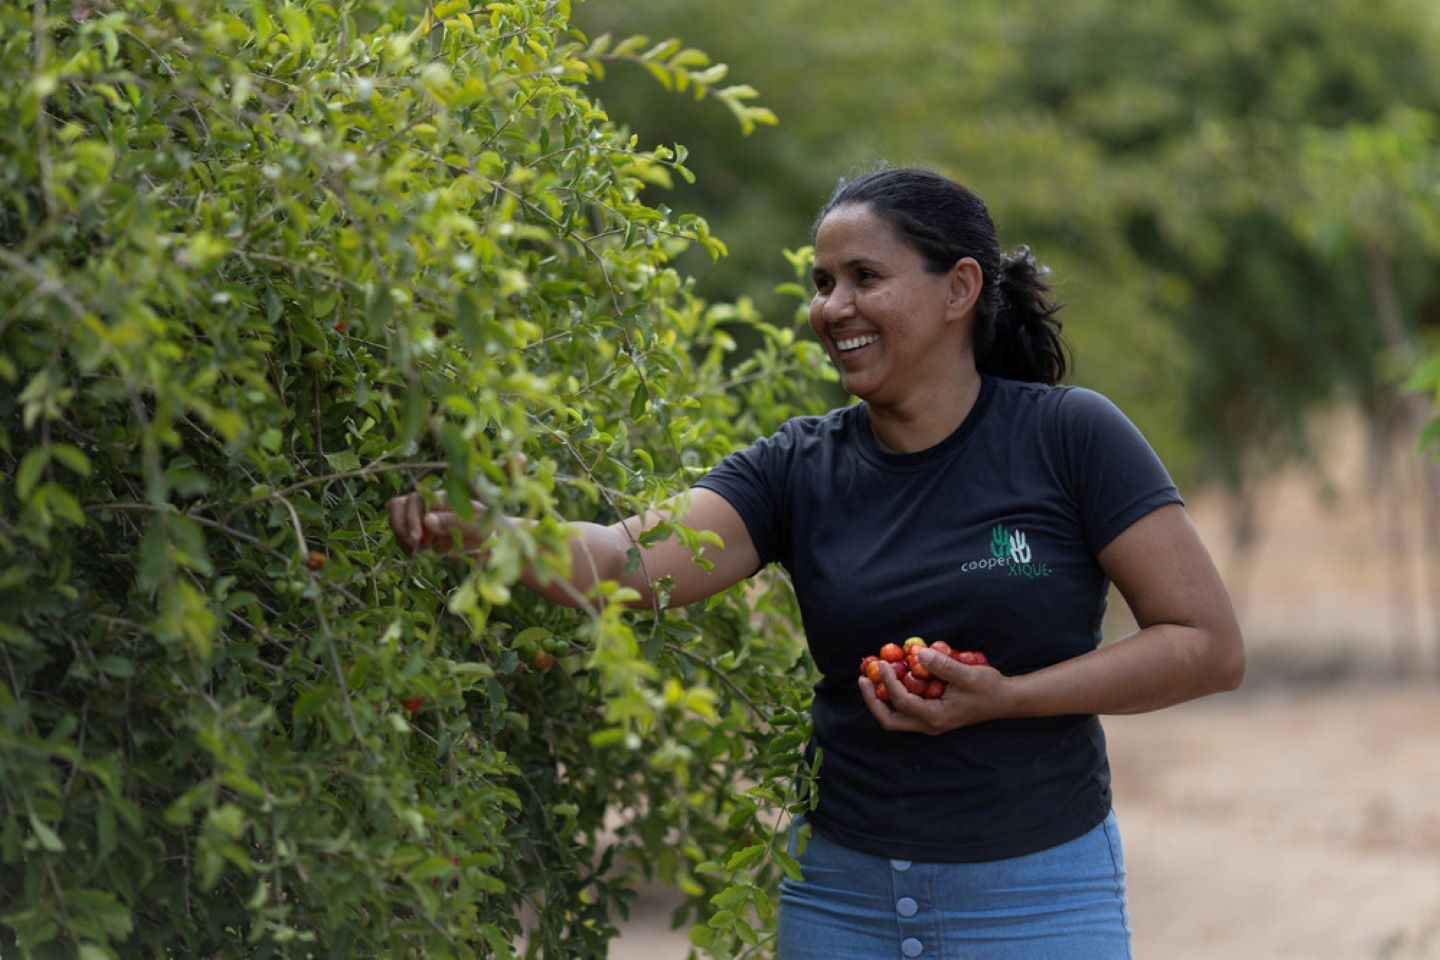 Ivoneide harvests acerola cherries to process at the plant where she works in Mossoró, Brazil. © IFAD/Ueslei Marcelino